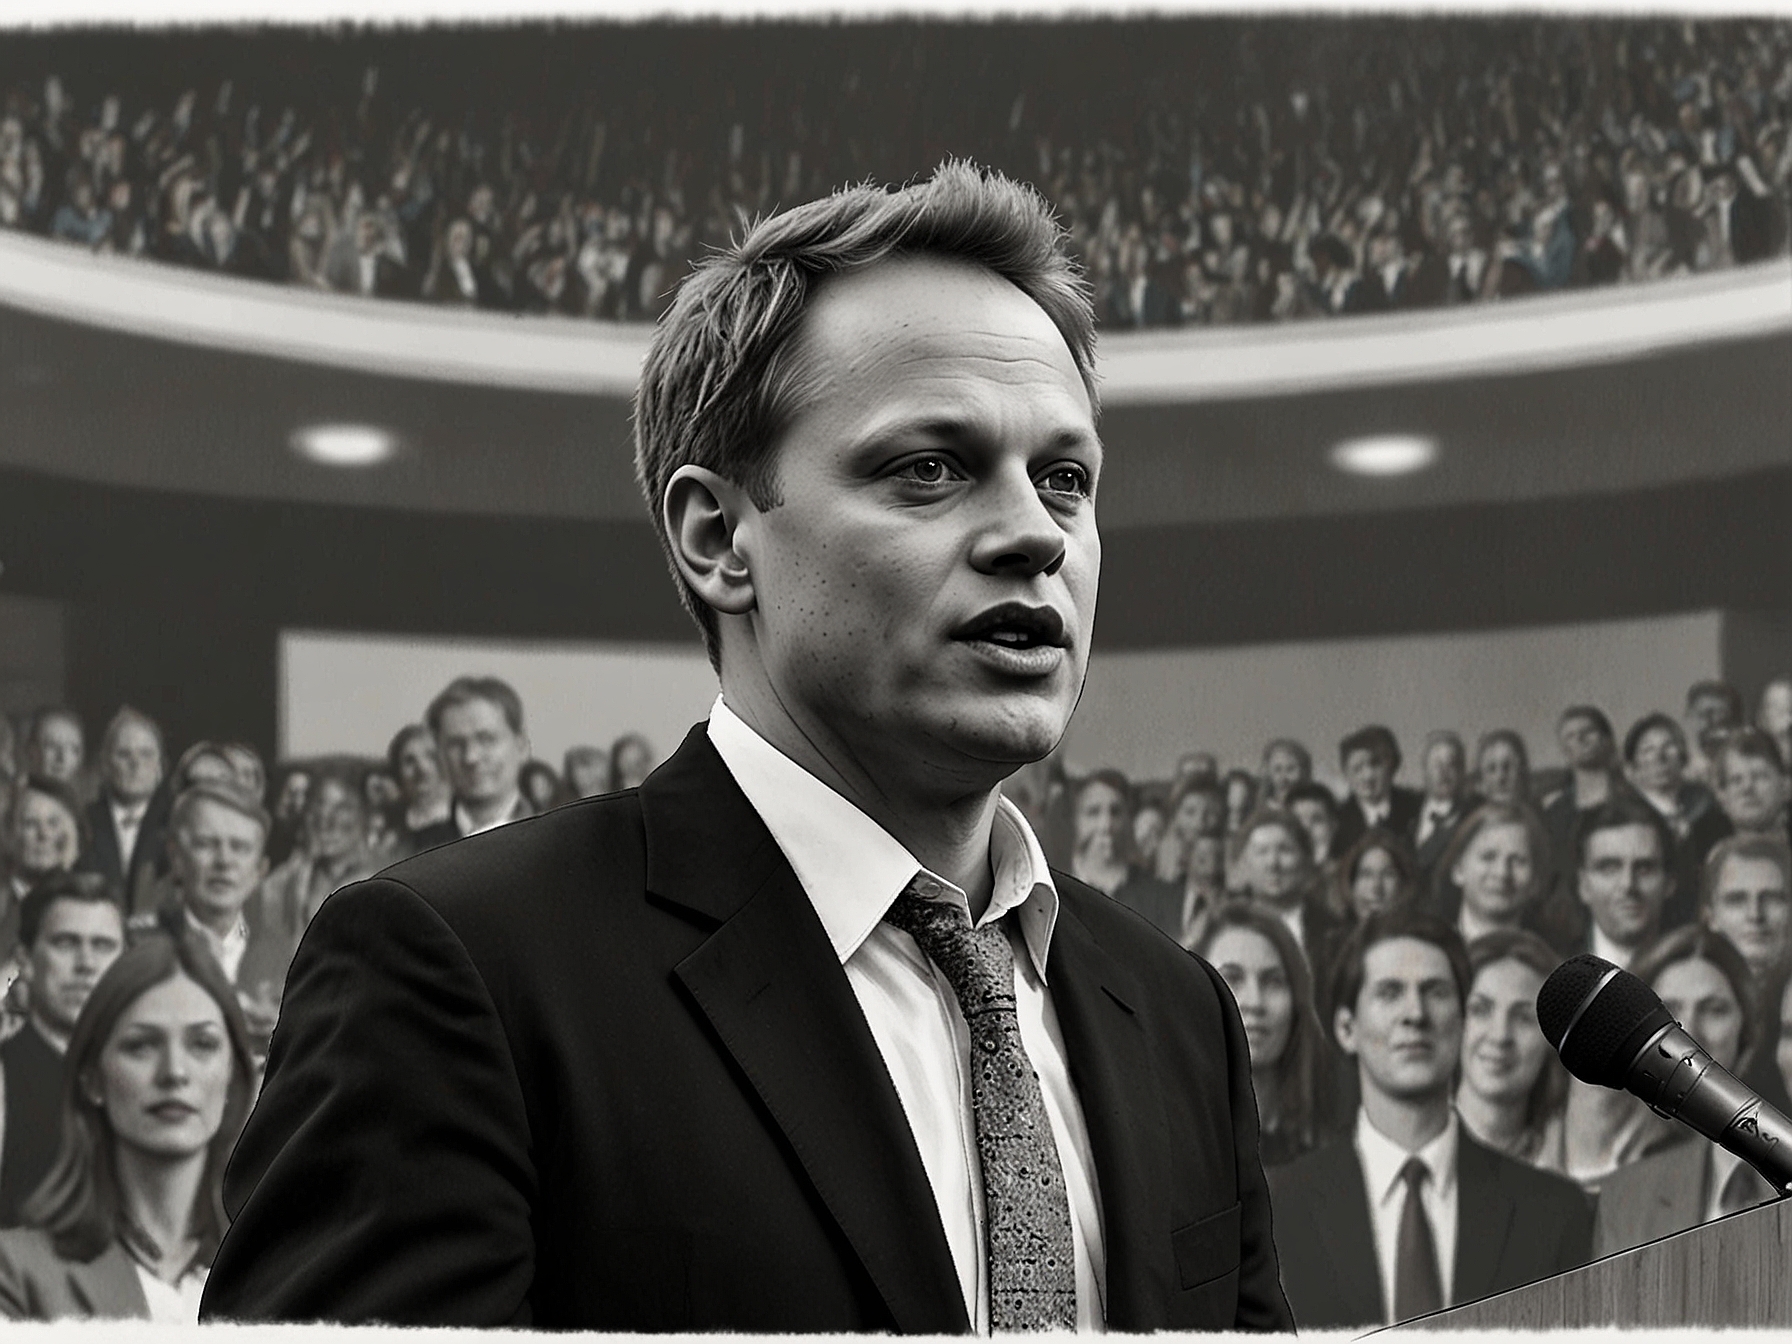 Grant Shapps delivering a speech, emphasizing the Conservative Party's stand against Labour's potential super-majority and its economic implications with a backdrop of Tory supporters.